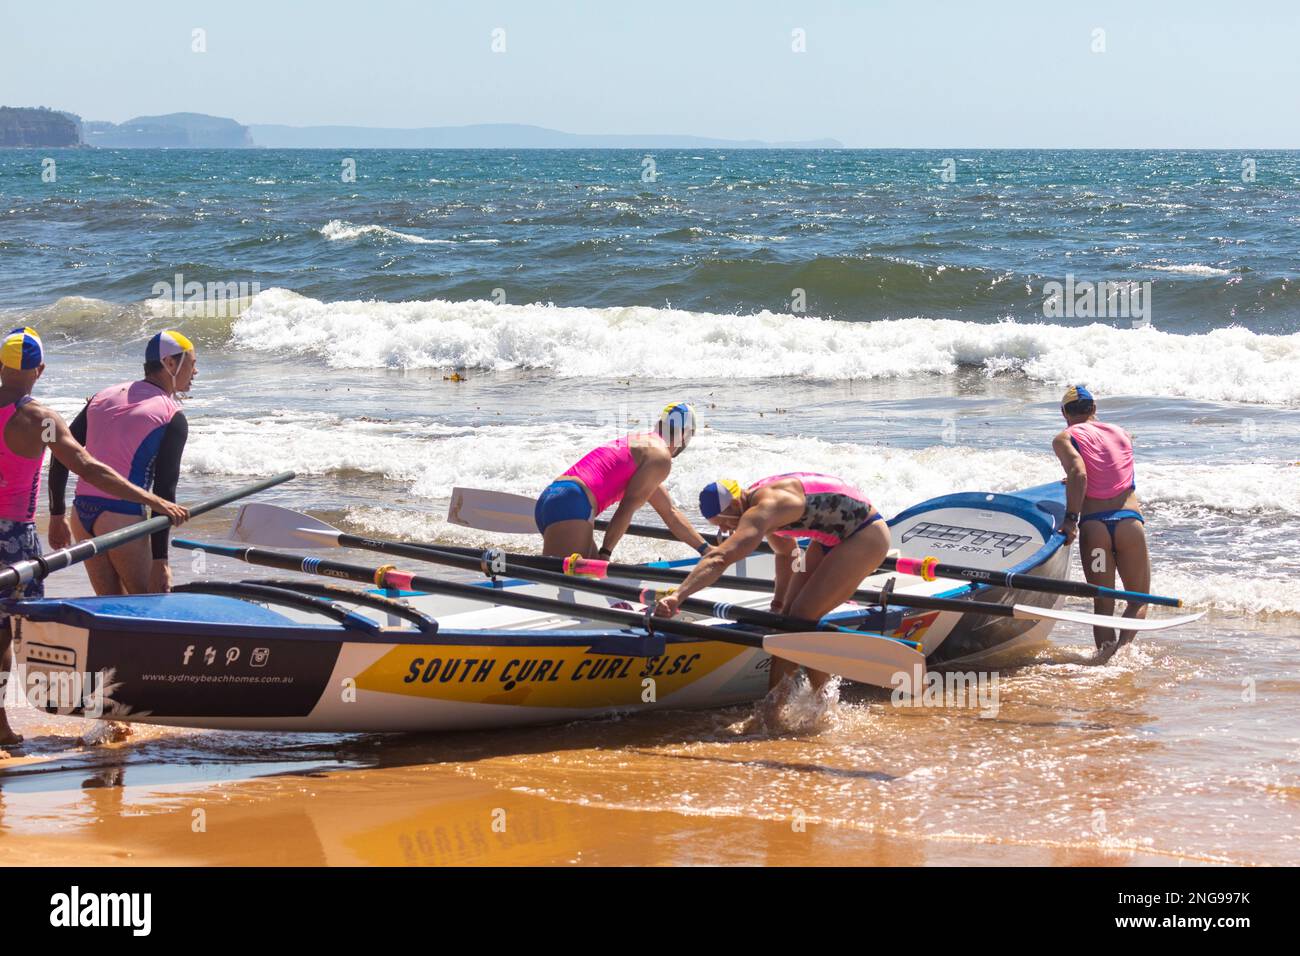 Australian surfboat racing carnival, mens team from South Curl Curl SLSC prepare to launch their boat off Collaroy beach in Sydney,NSW,Australia Stock Photo